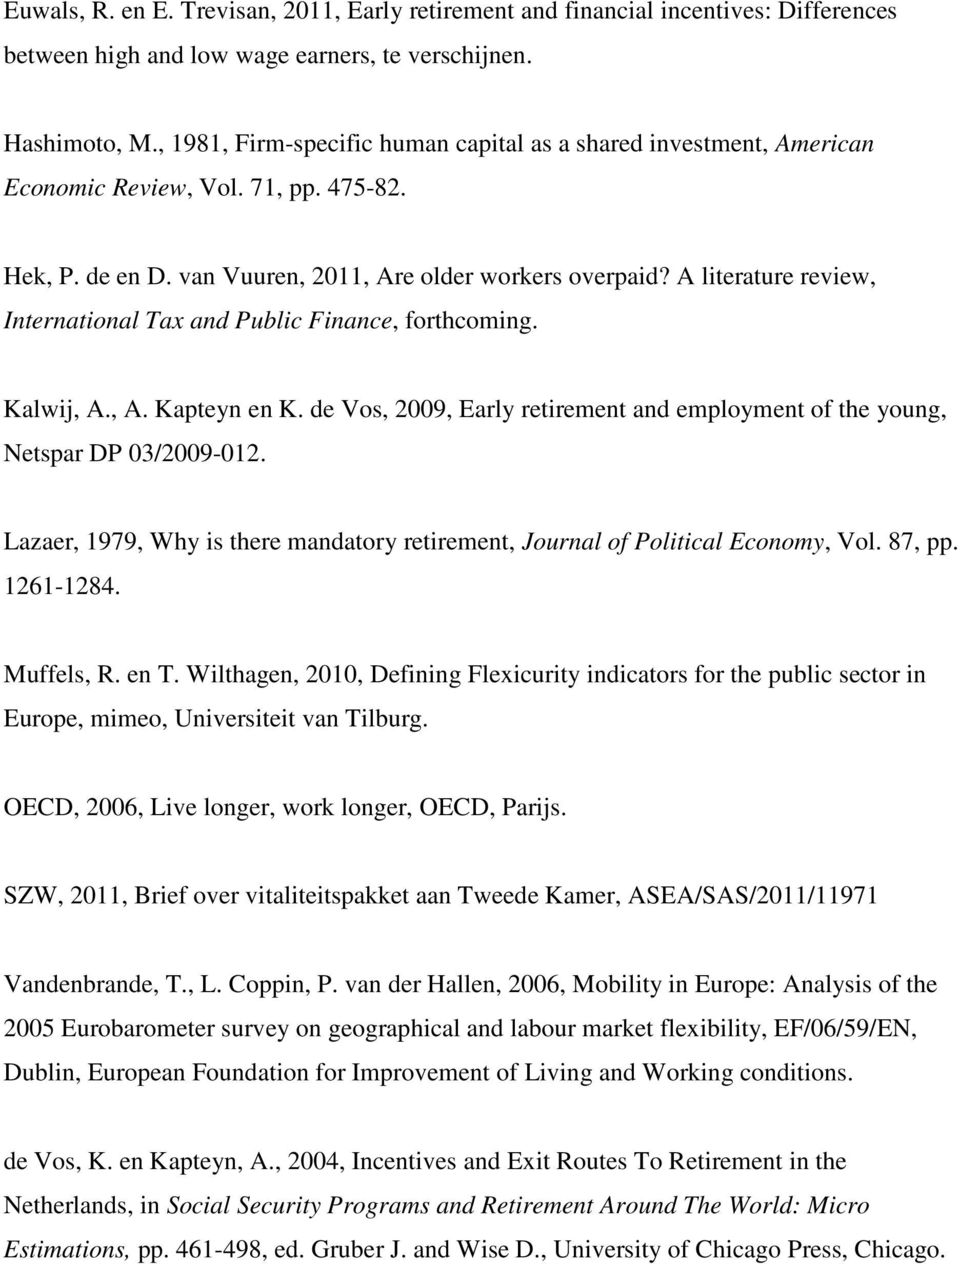 A literature review, International Tax and Public Finance, forthcoming. Kalwij, A., A. Kapteyn en K. de Vos, 2009, Early retirement and employment of the young, Netspar DP 03/2009-012.